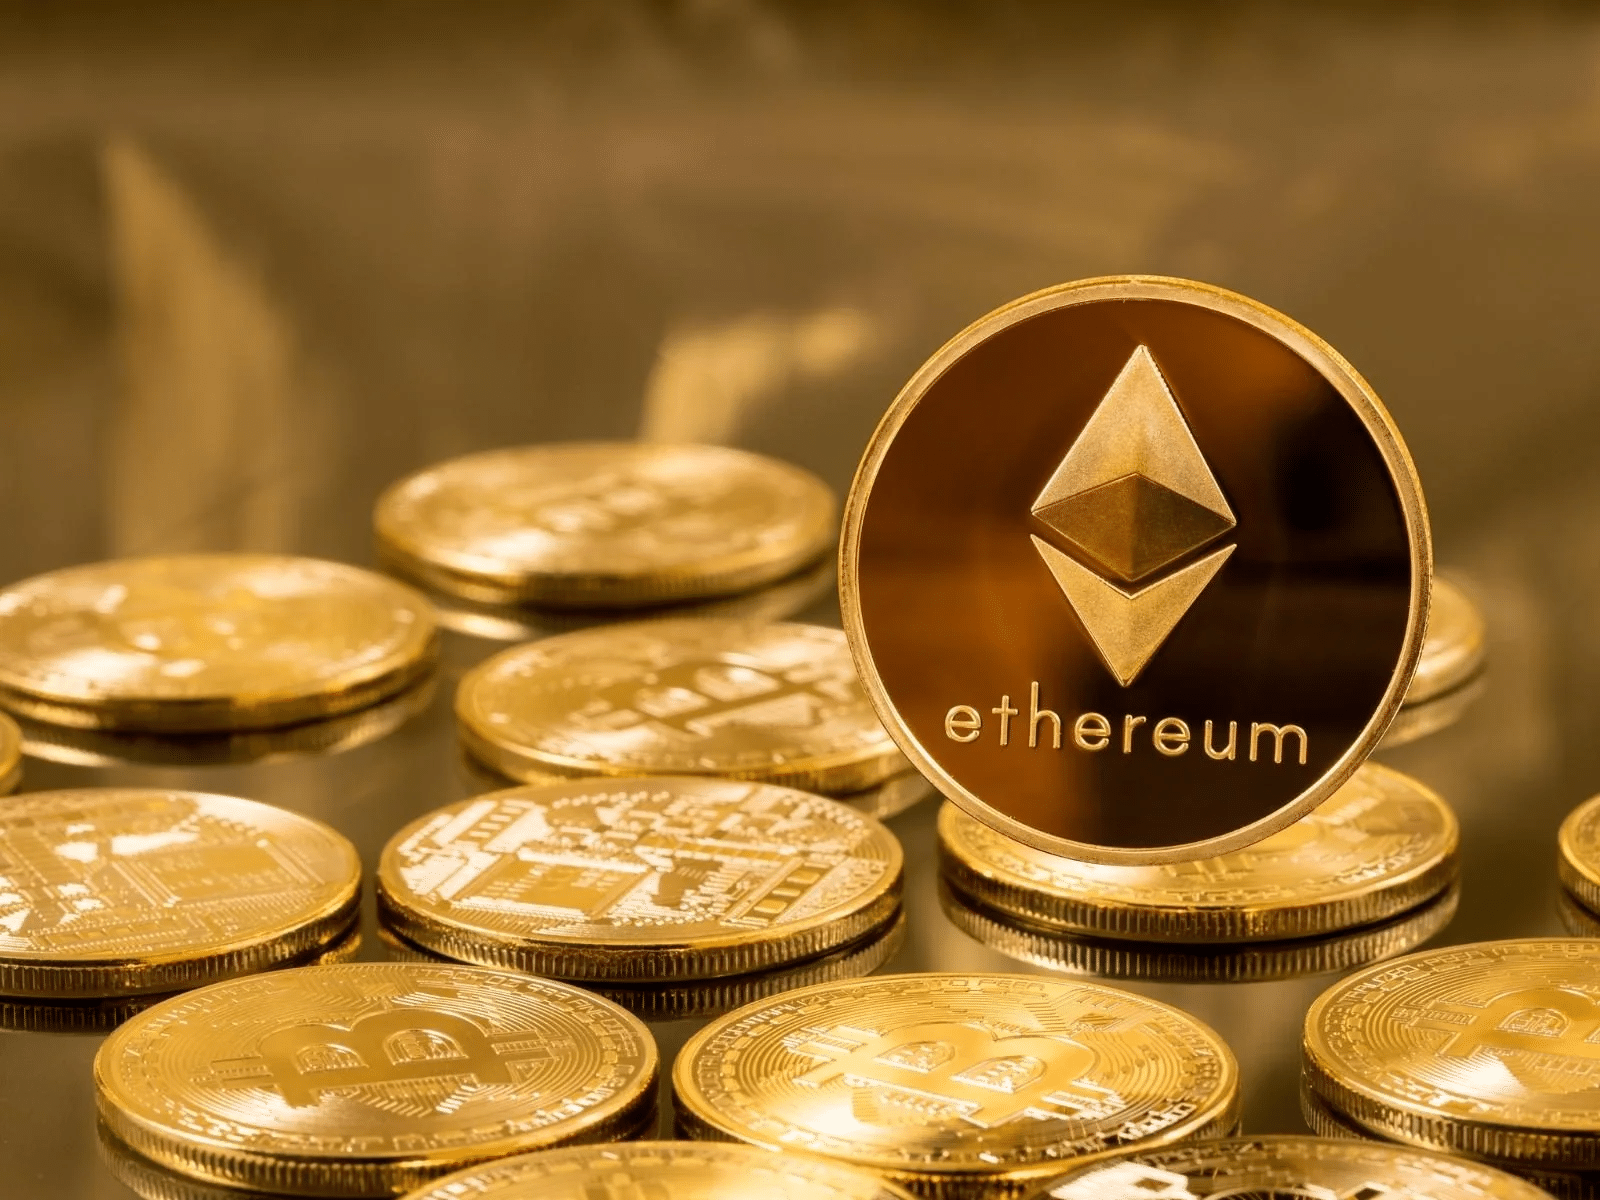 15+ New Cryptocurrencies To Buy in 